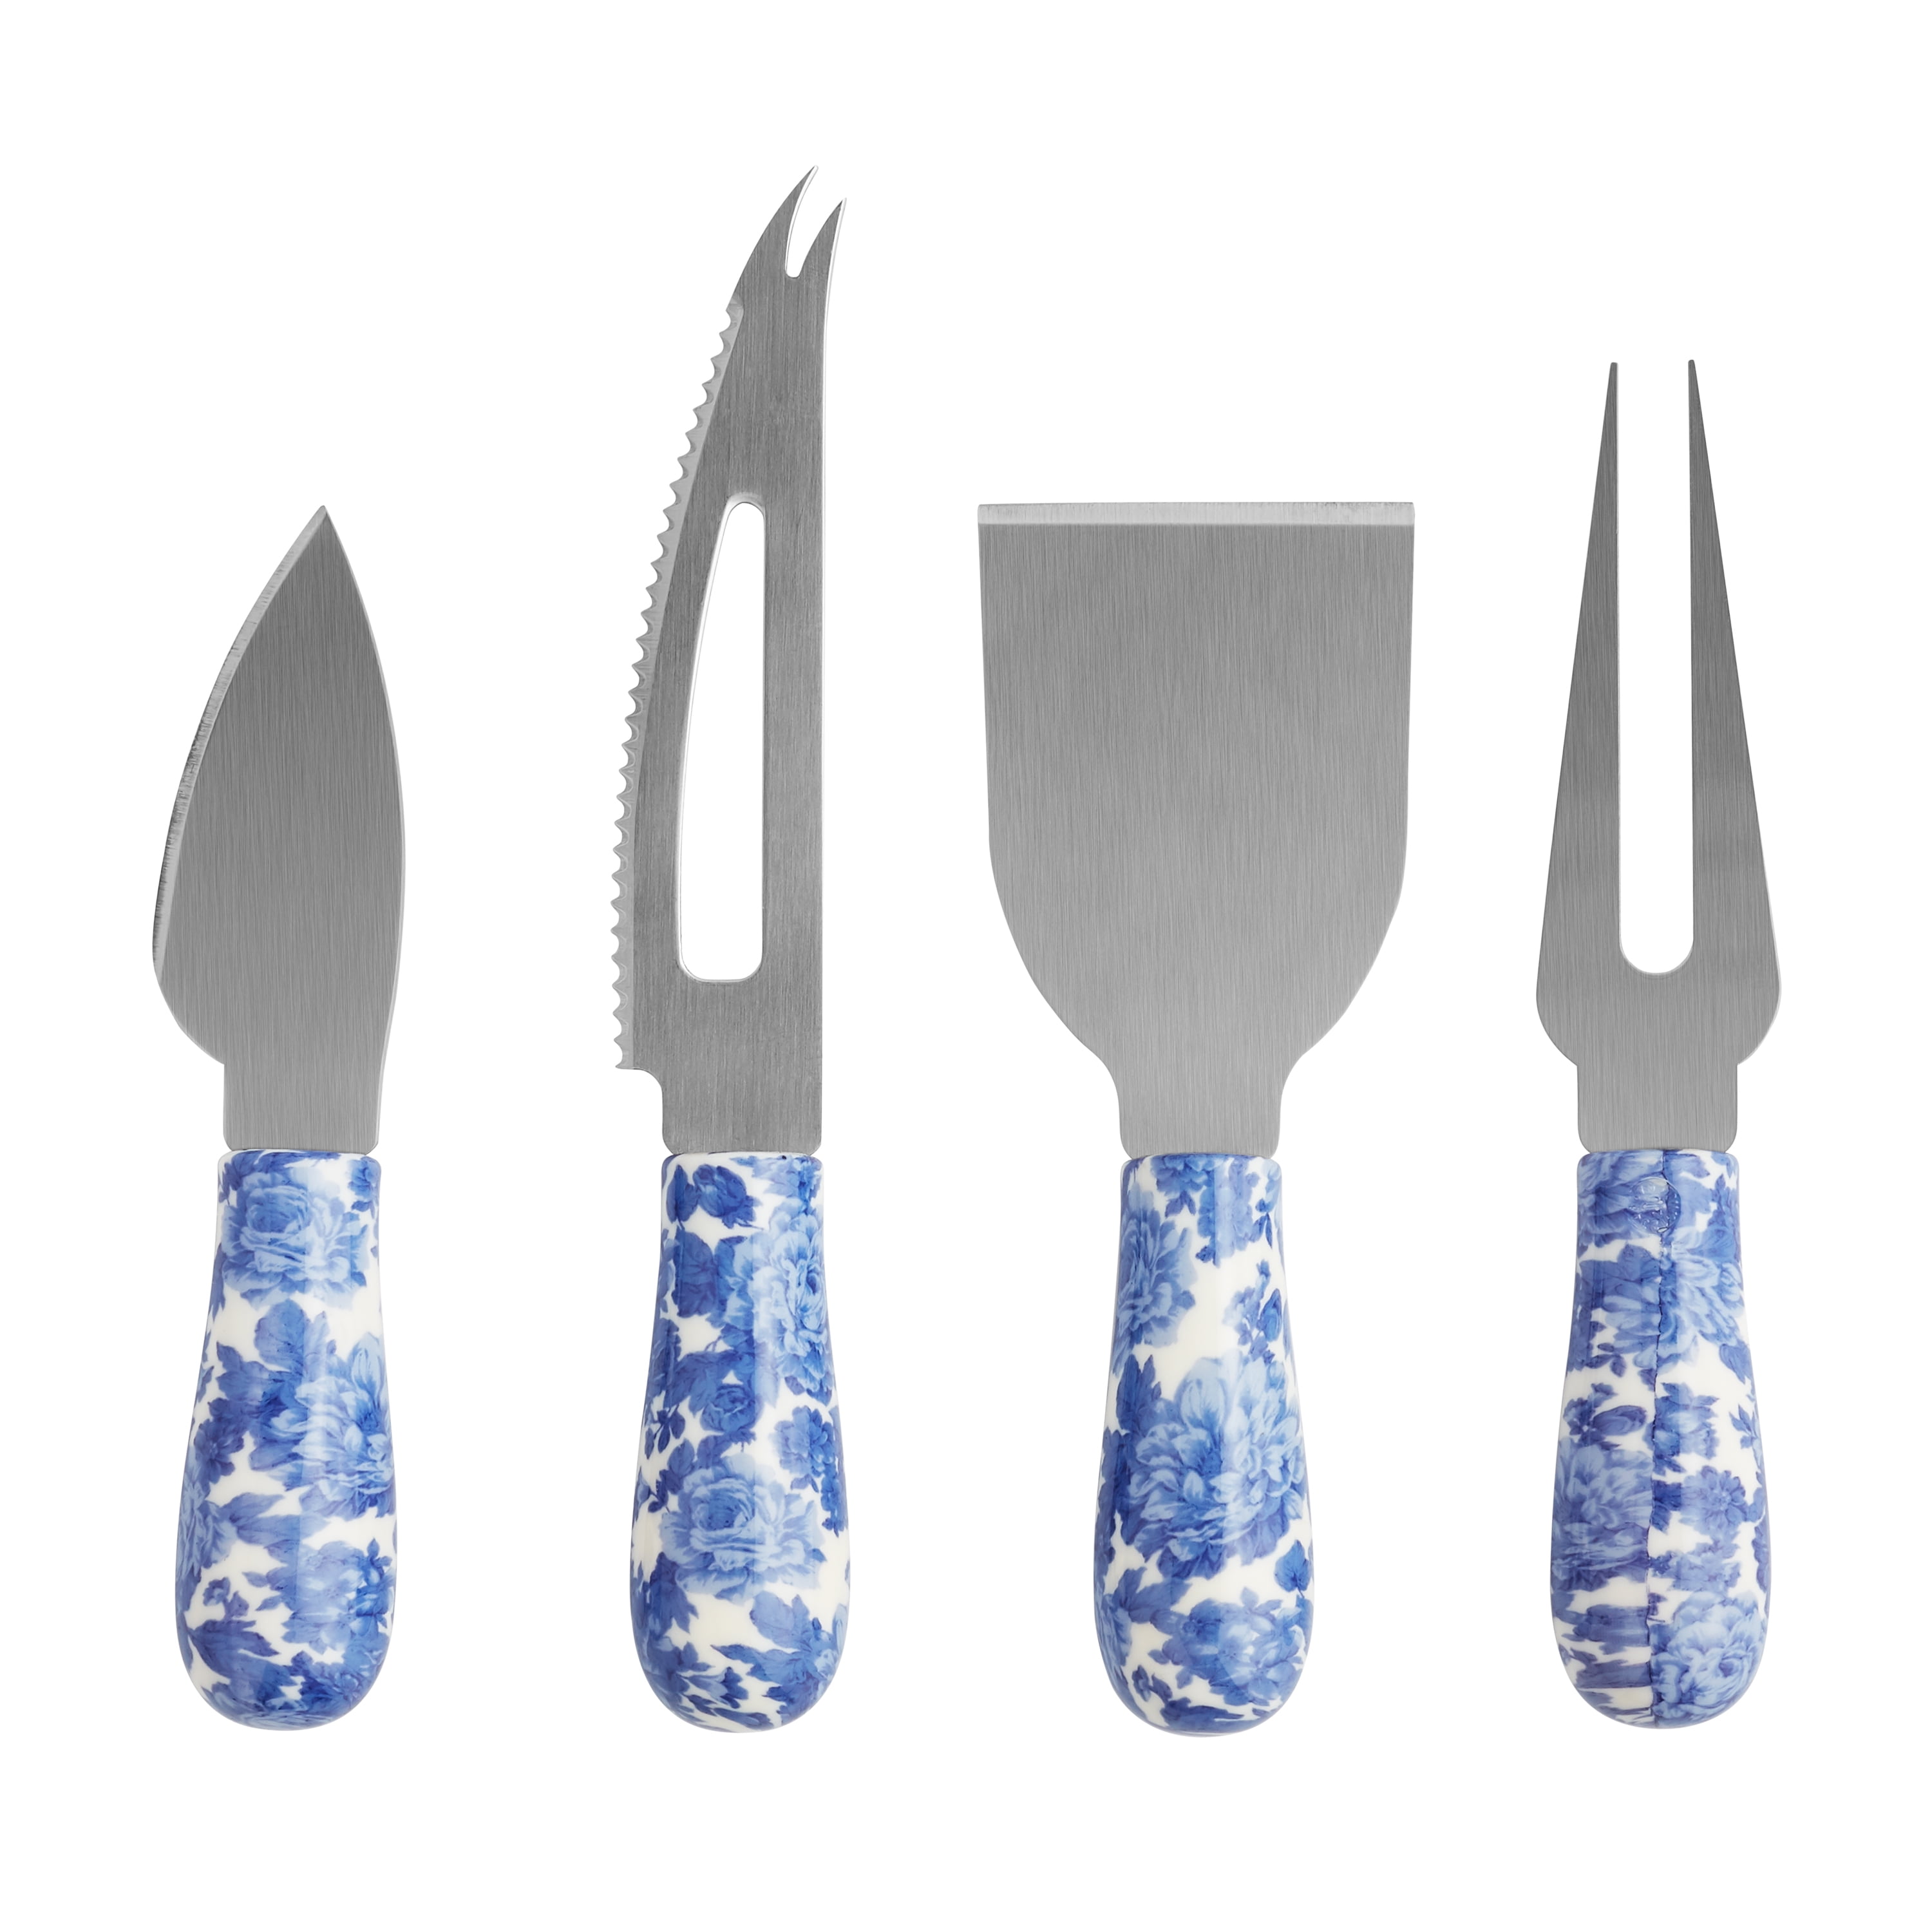 The Pioneer Woman 4-Piece Heritage Floral Cheese Knife Set - Walmart.com